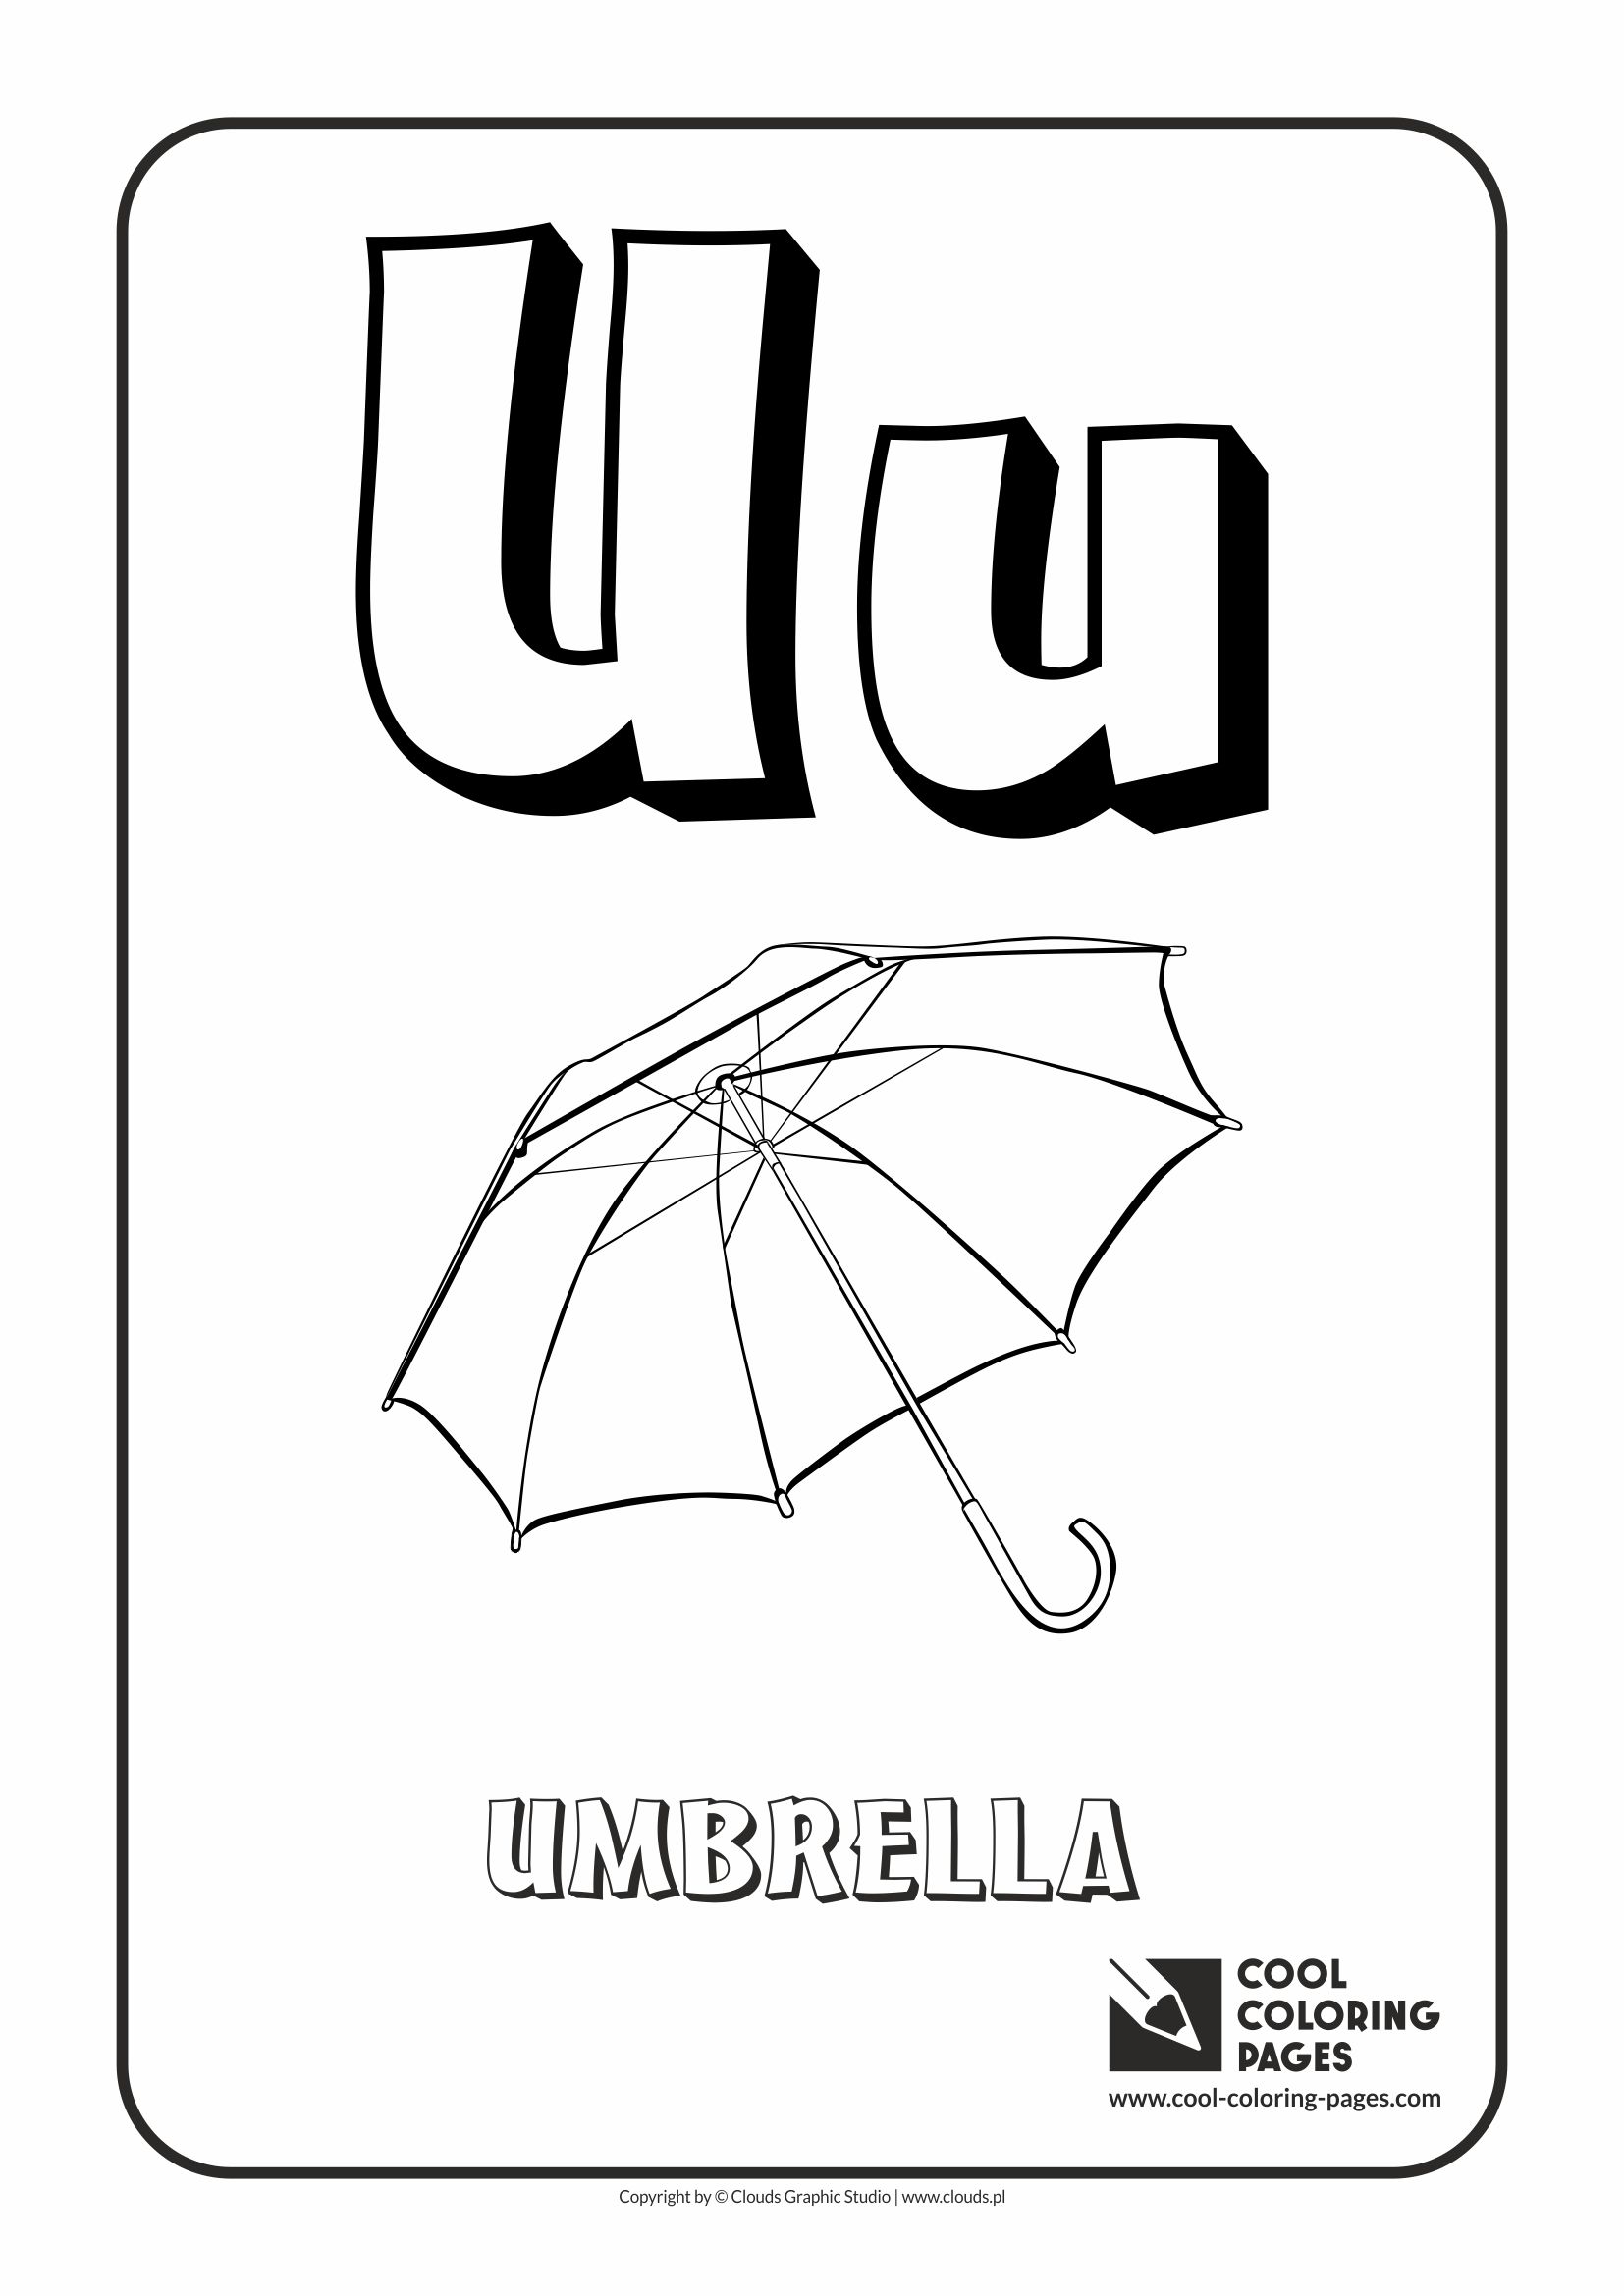 Cool Coloring Pages - Alphabet / Letter U / Coloring page with letter U